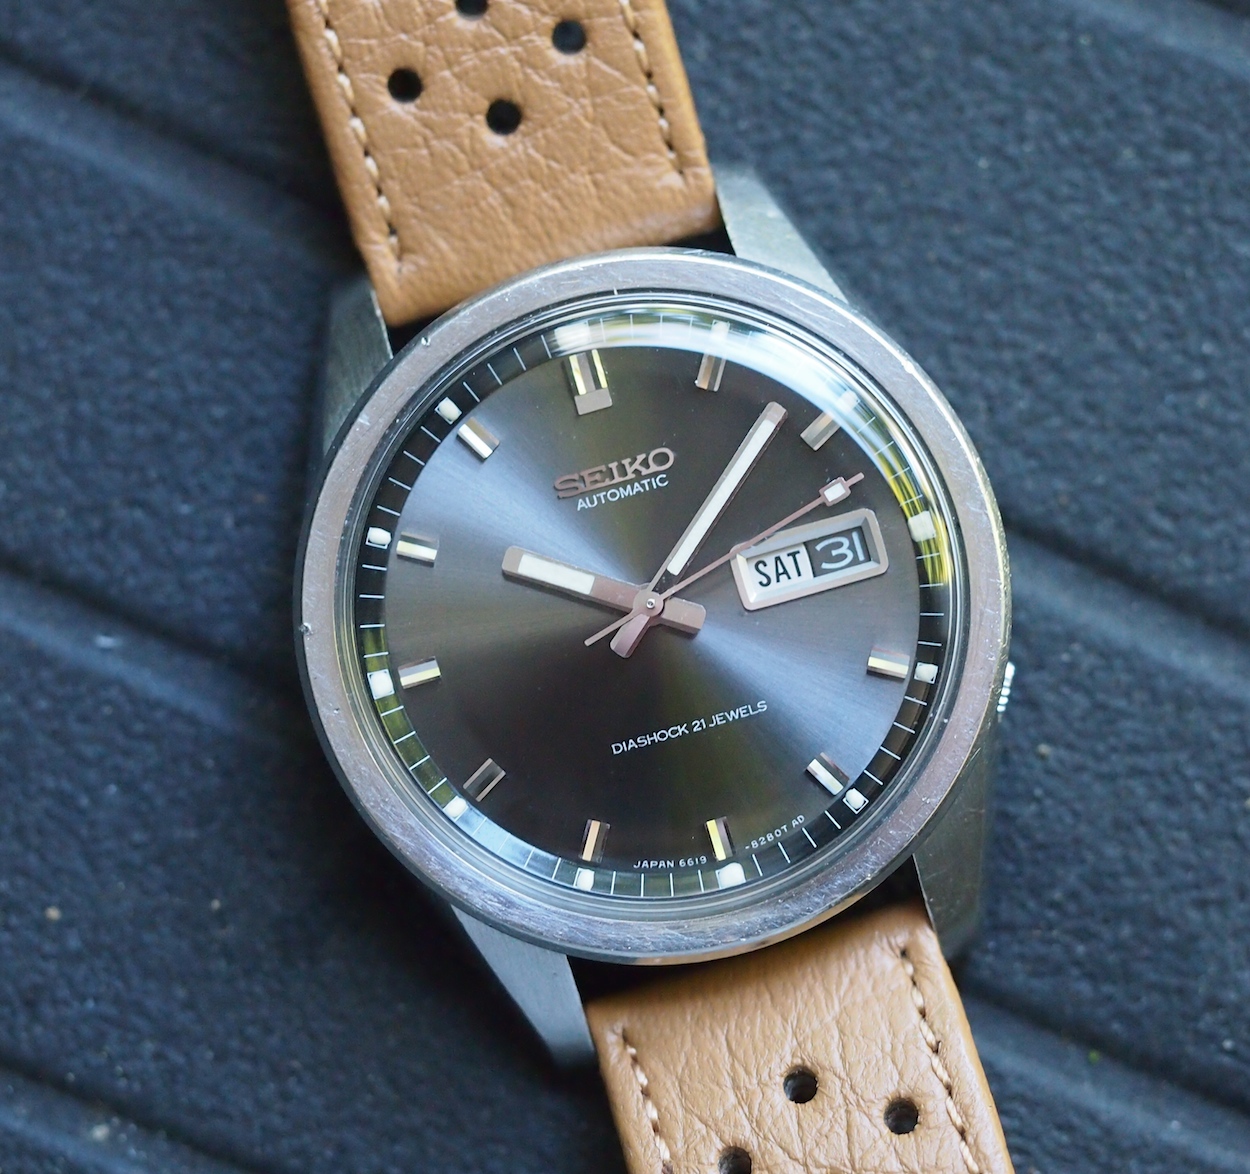 The Seiko Sportsmatic is a great all-arounder